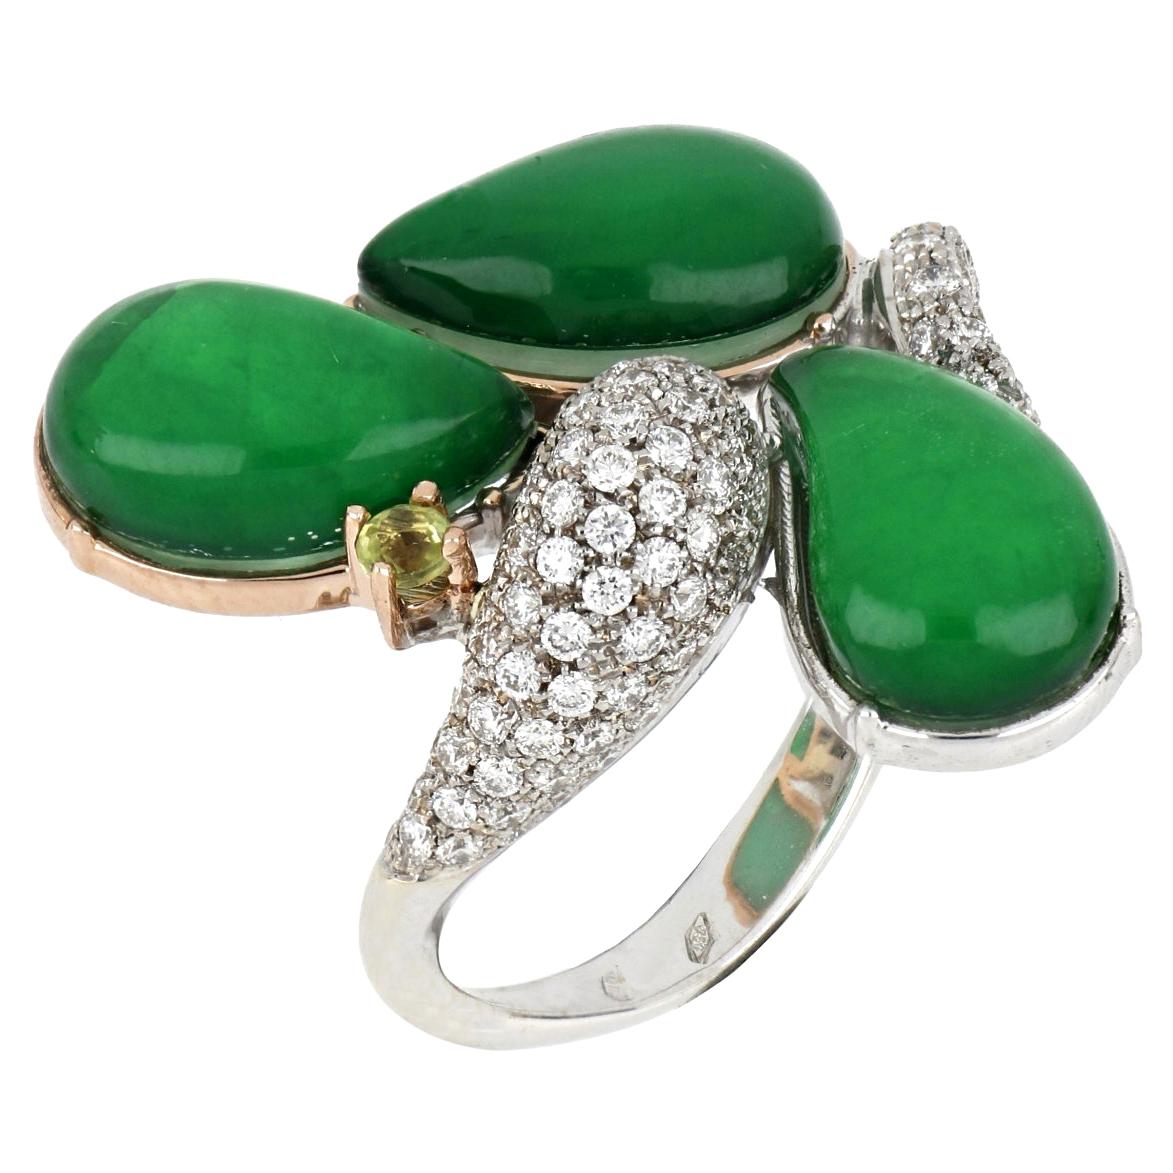 18kt White and Rose Gold Les Fleurs Ring with Green Aventurine and Diamonds